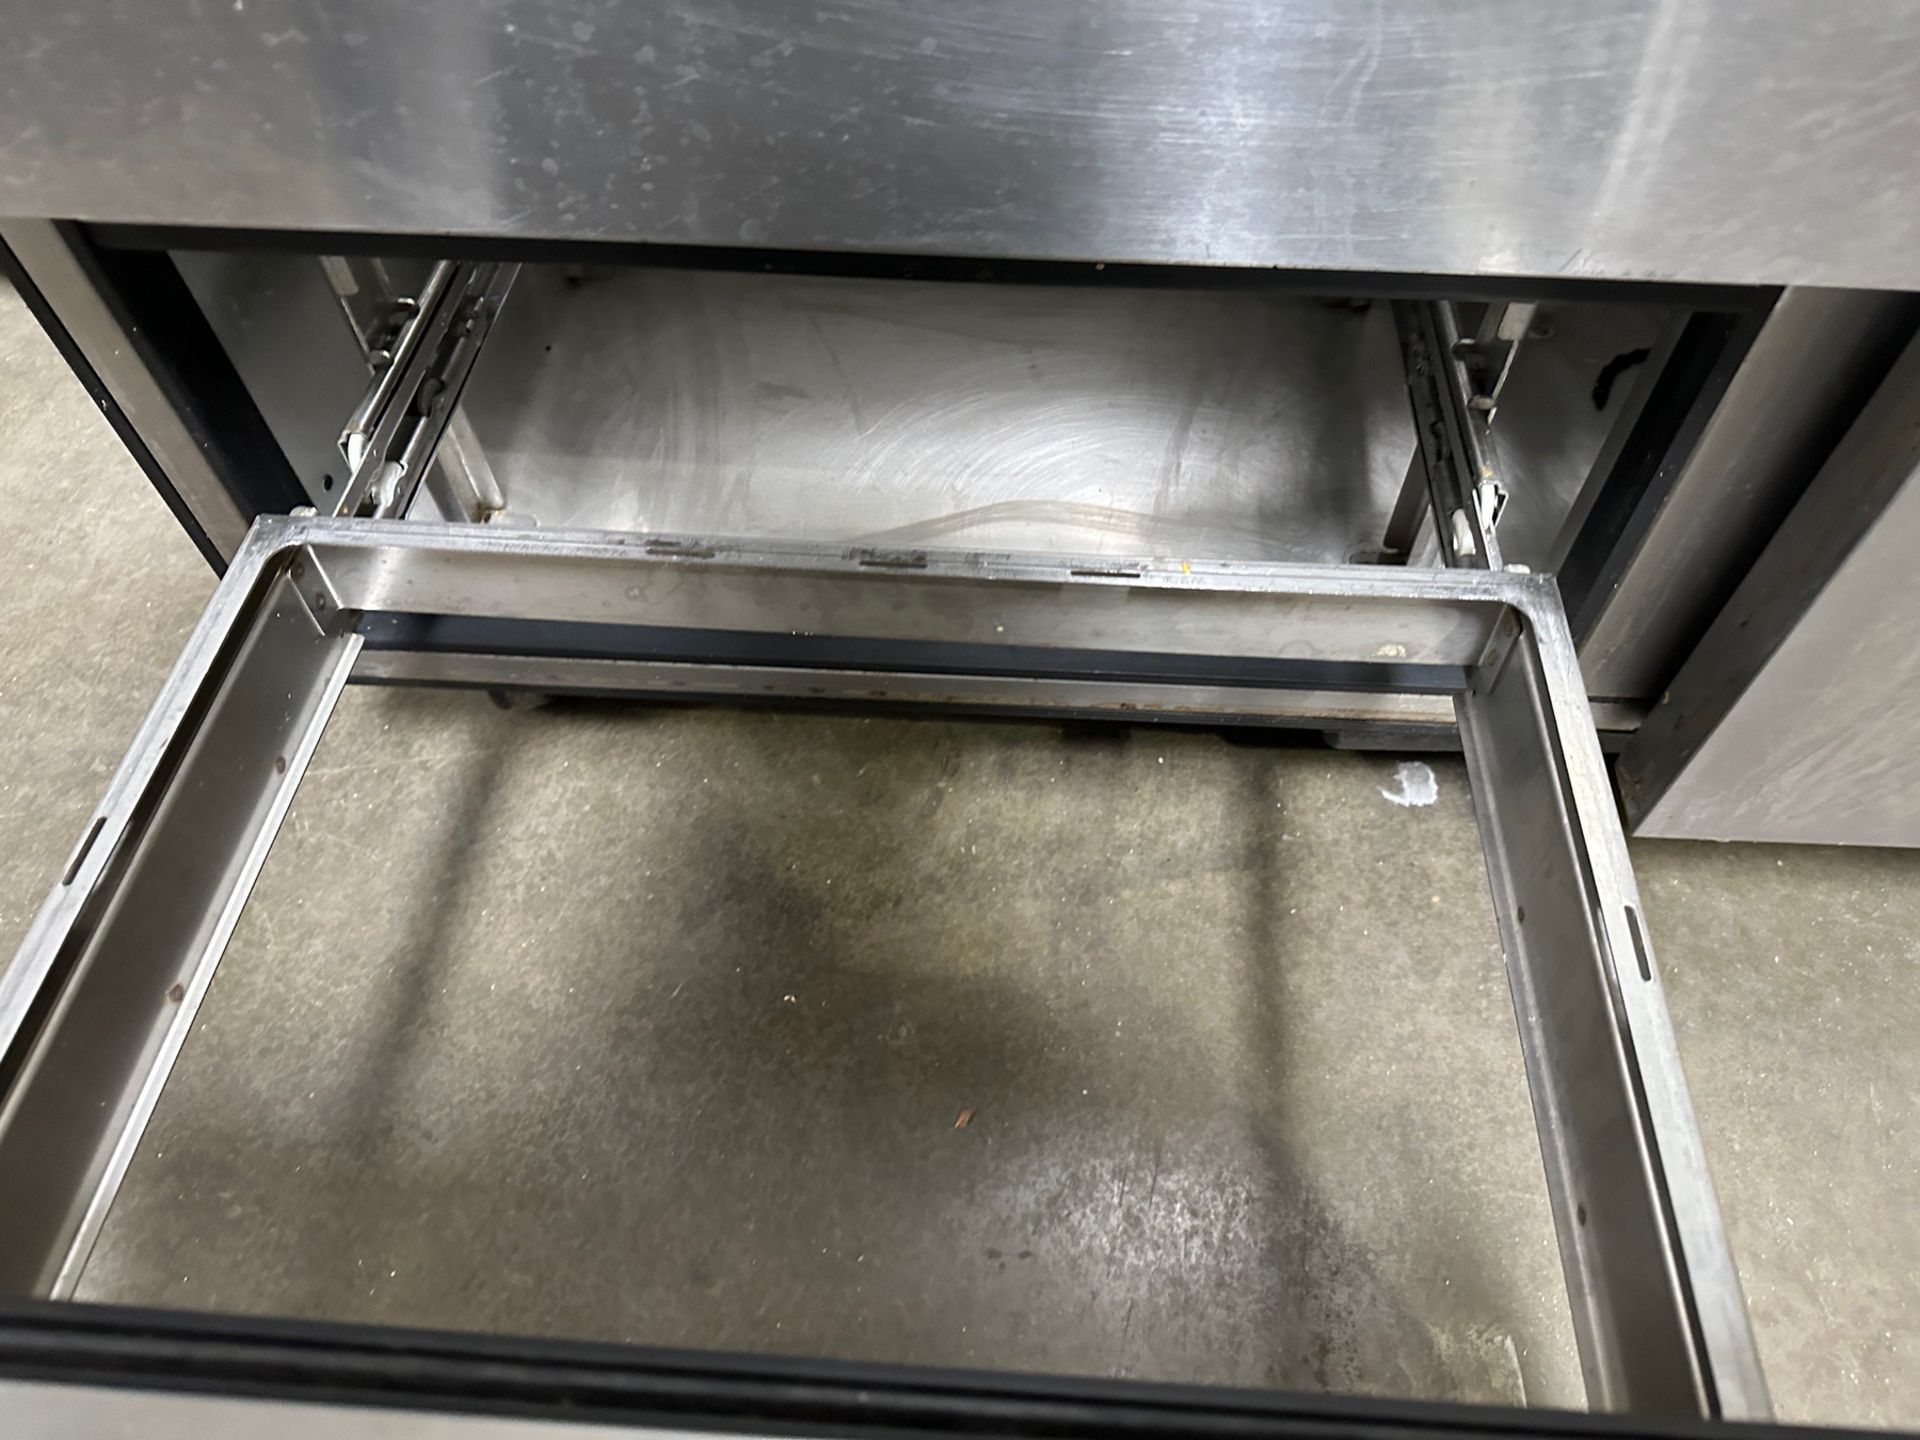 True Refrigeration Stainless Steel Refrigerated Prep Station | Rig Fee $100 - Image 4 of 6